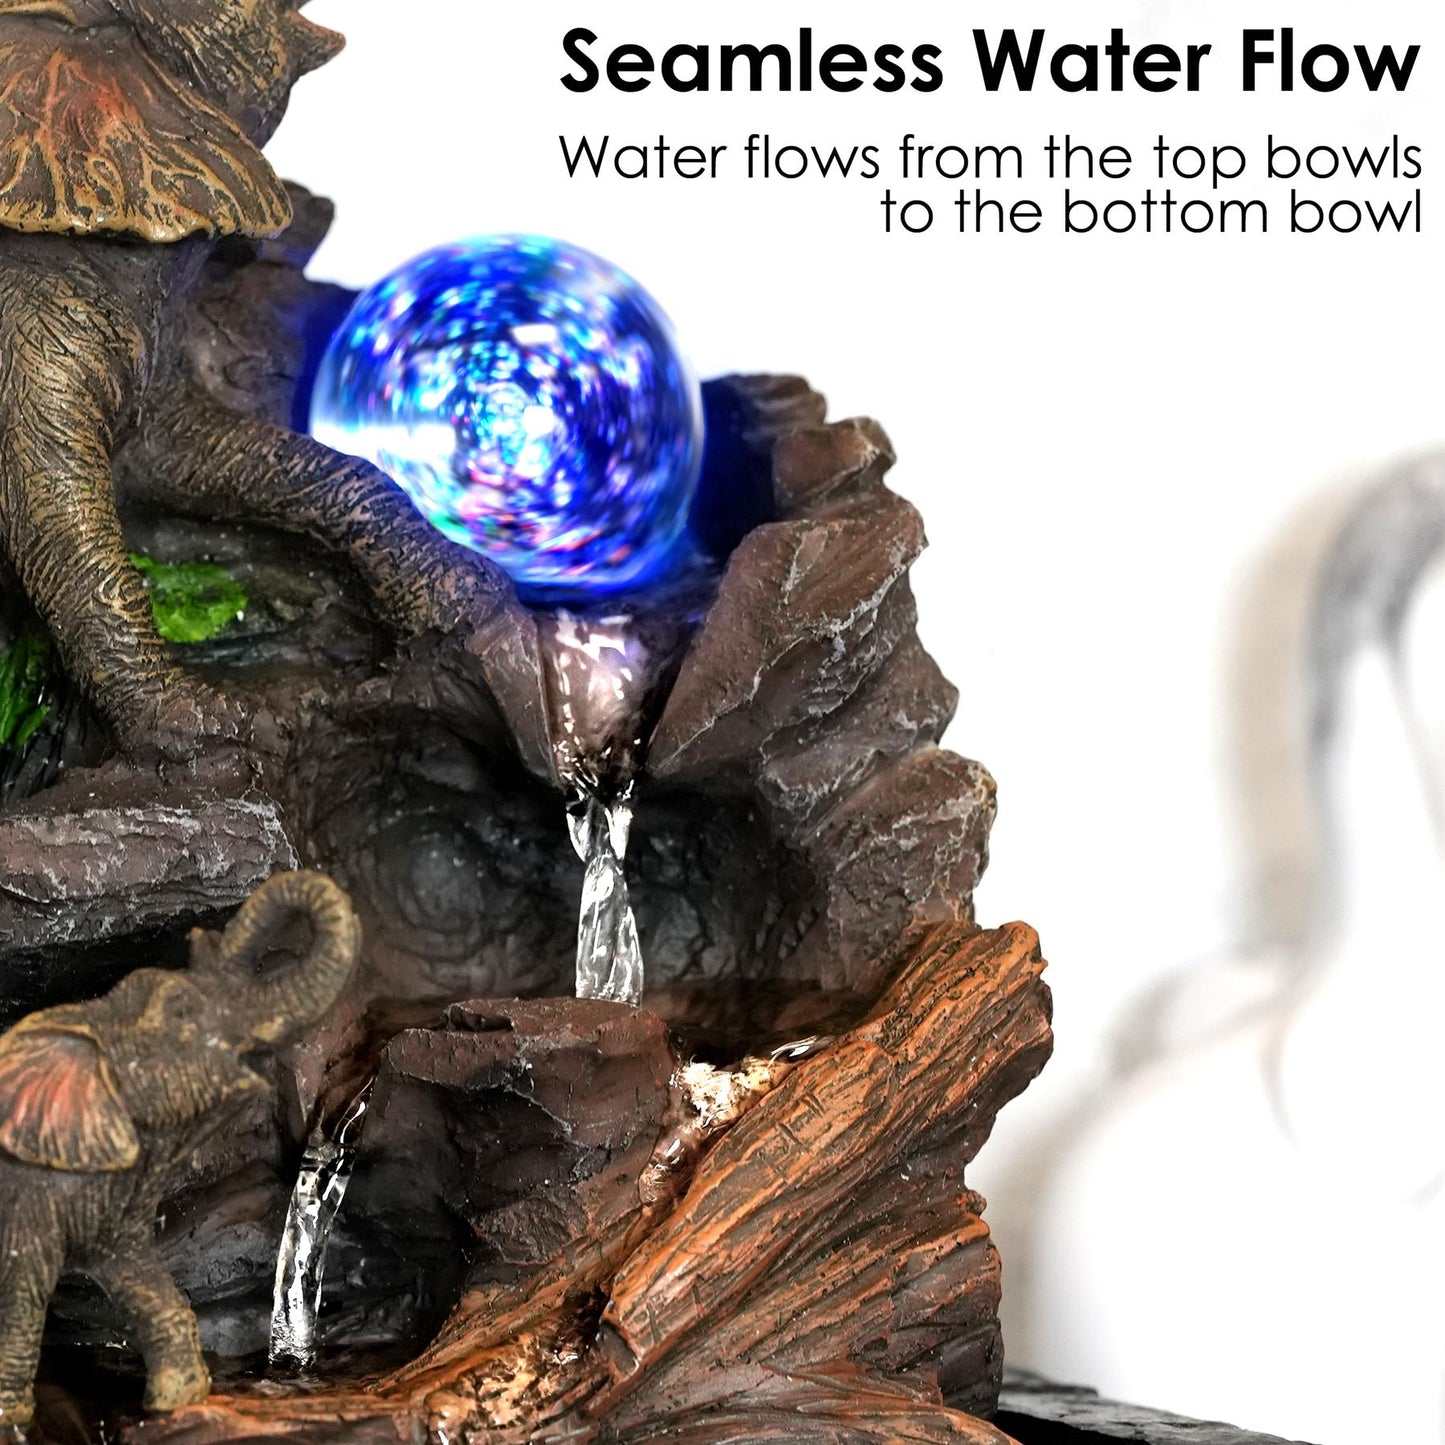 Elephant Water Feature Led Lights by GEEZY - UKBuyZone